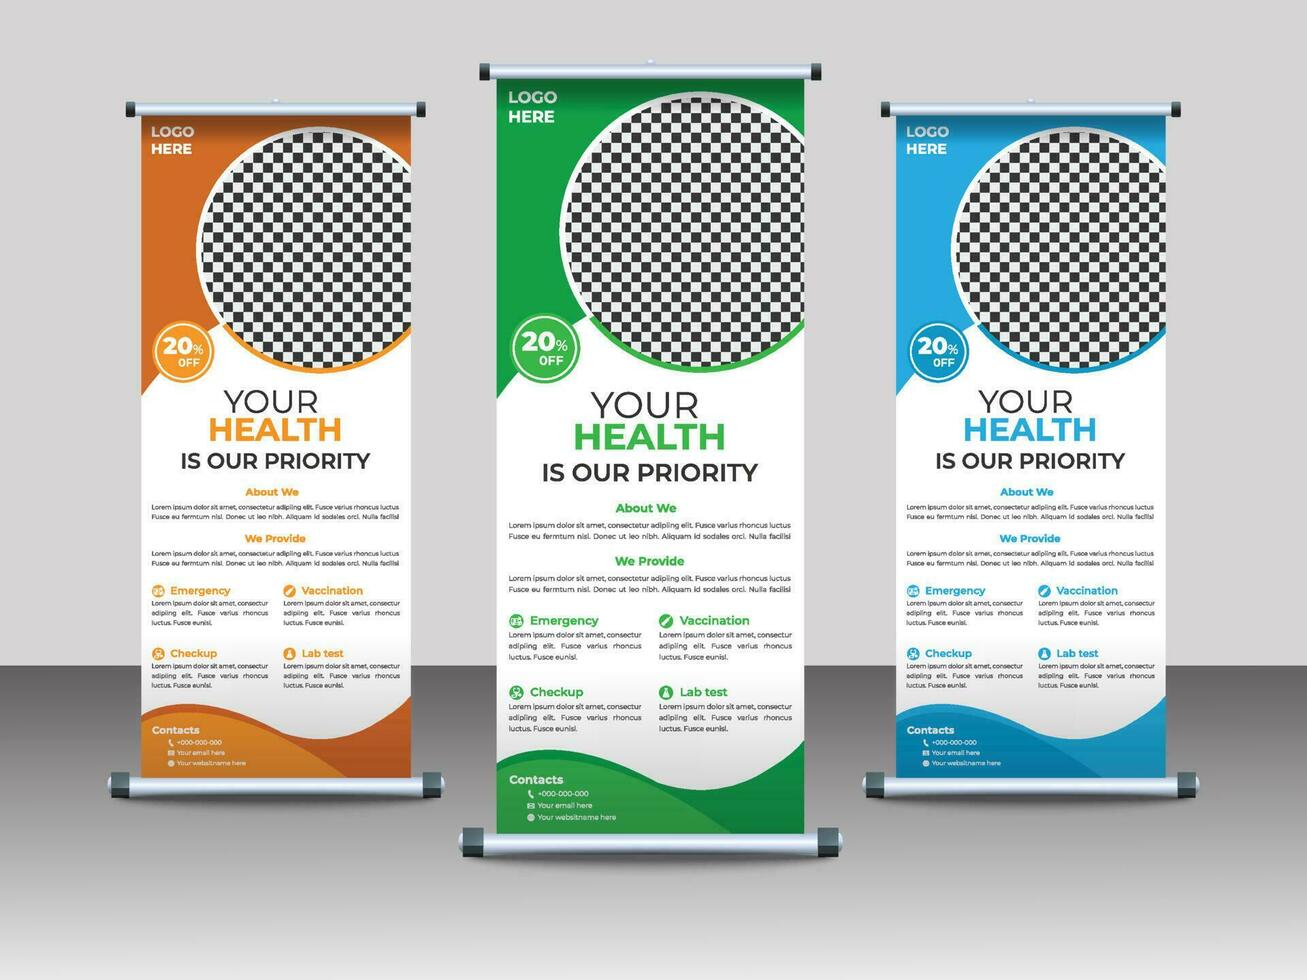 Professional Medical Roll Up Banner Design Template vector